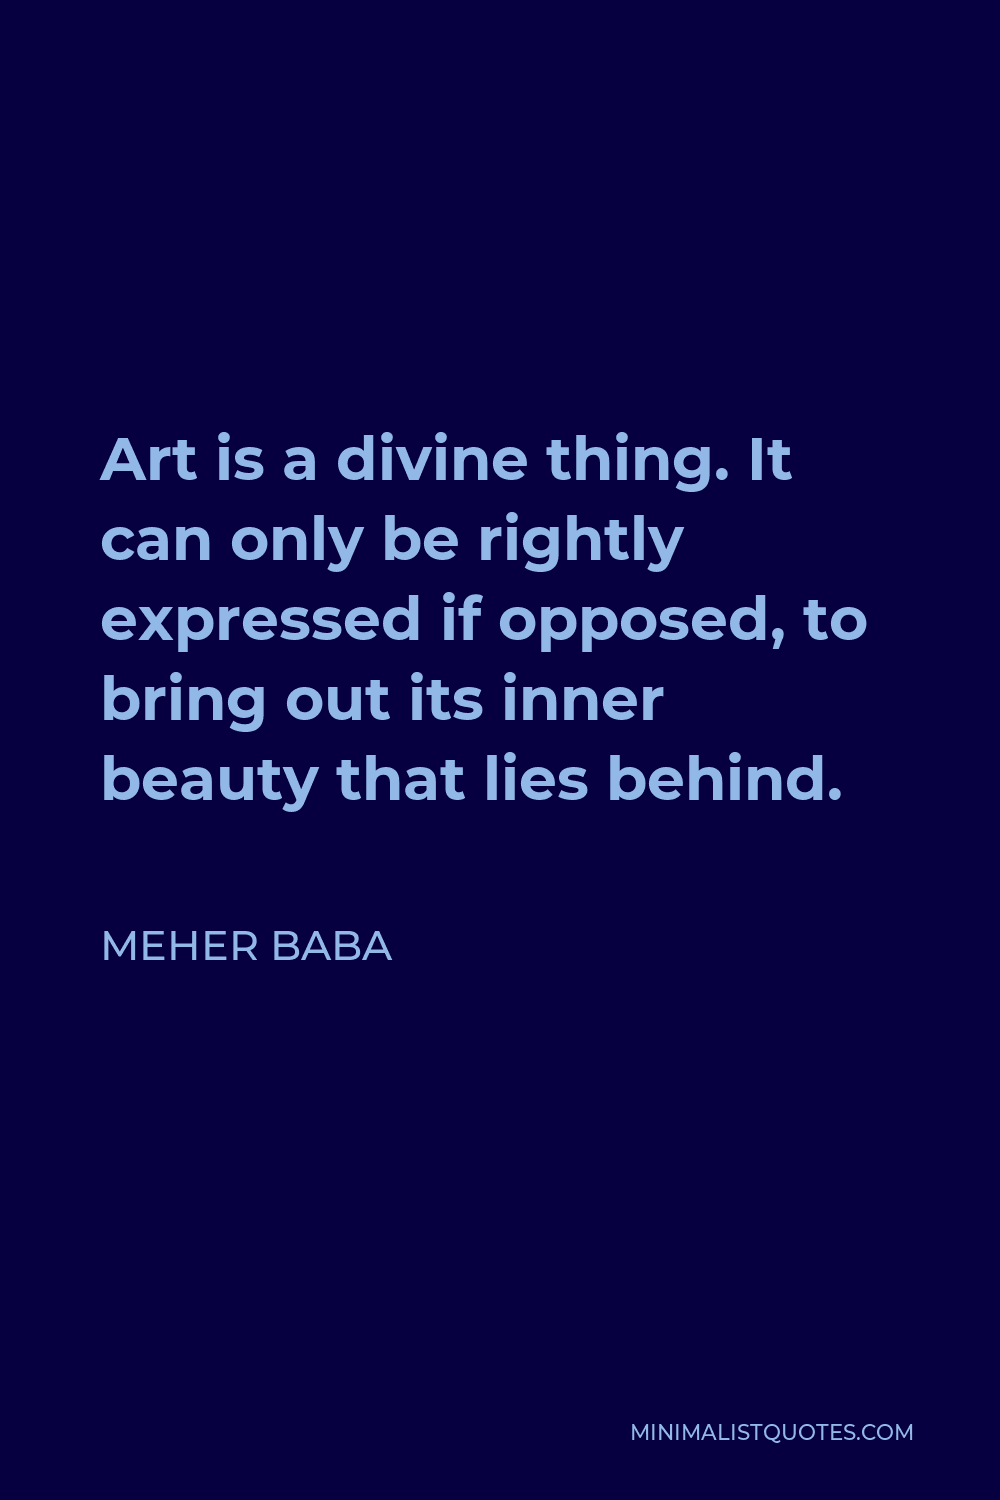 Meher Baba Quote - Art is a divine thing. It can only be rightly expressed if opposed, to bring out its inner beauty that lies behind.